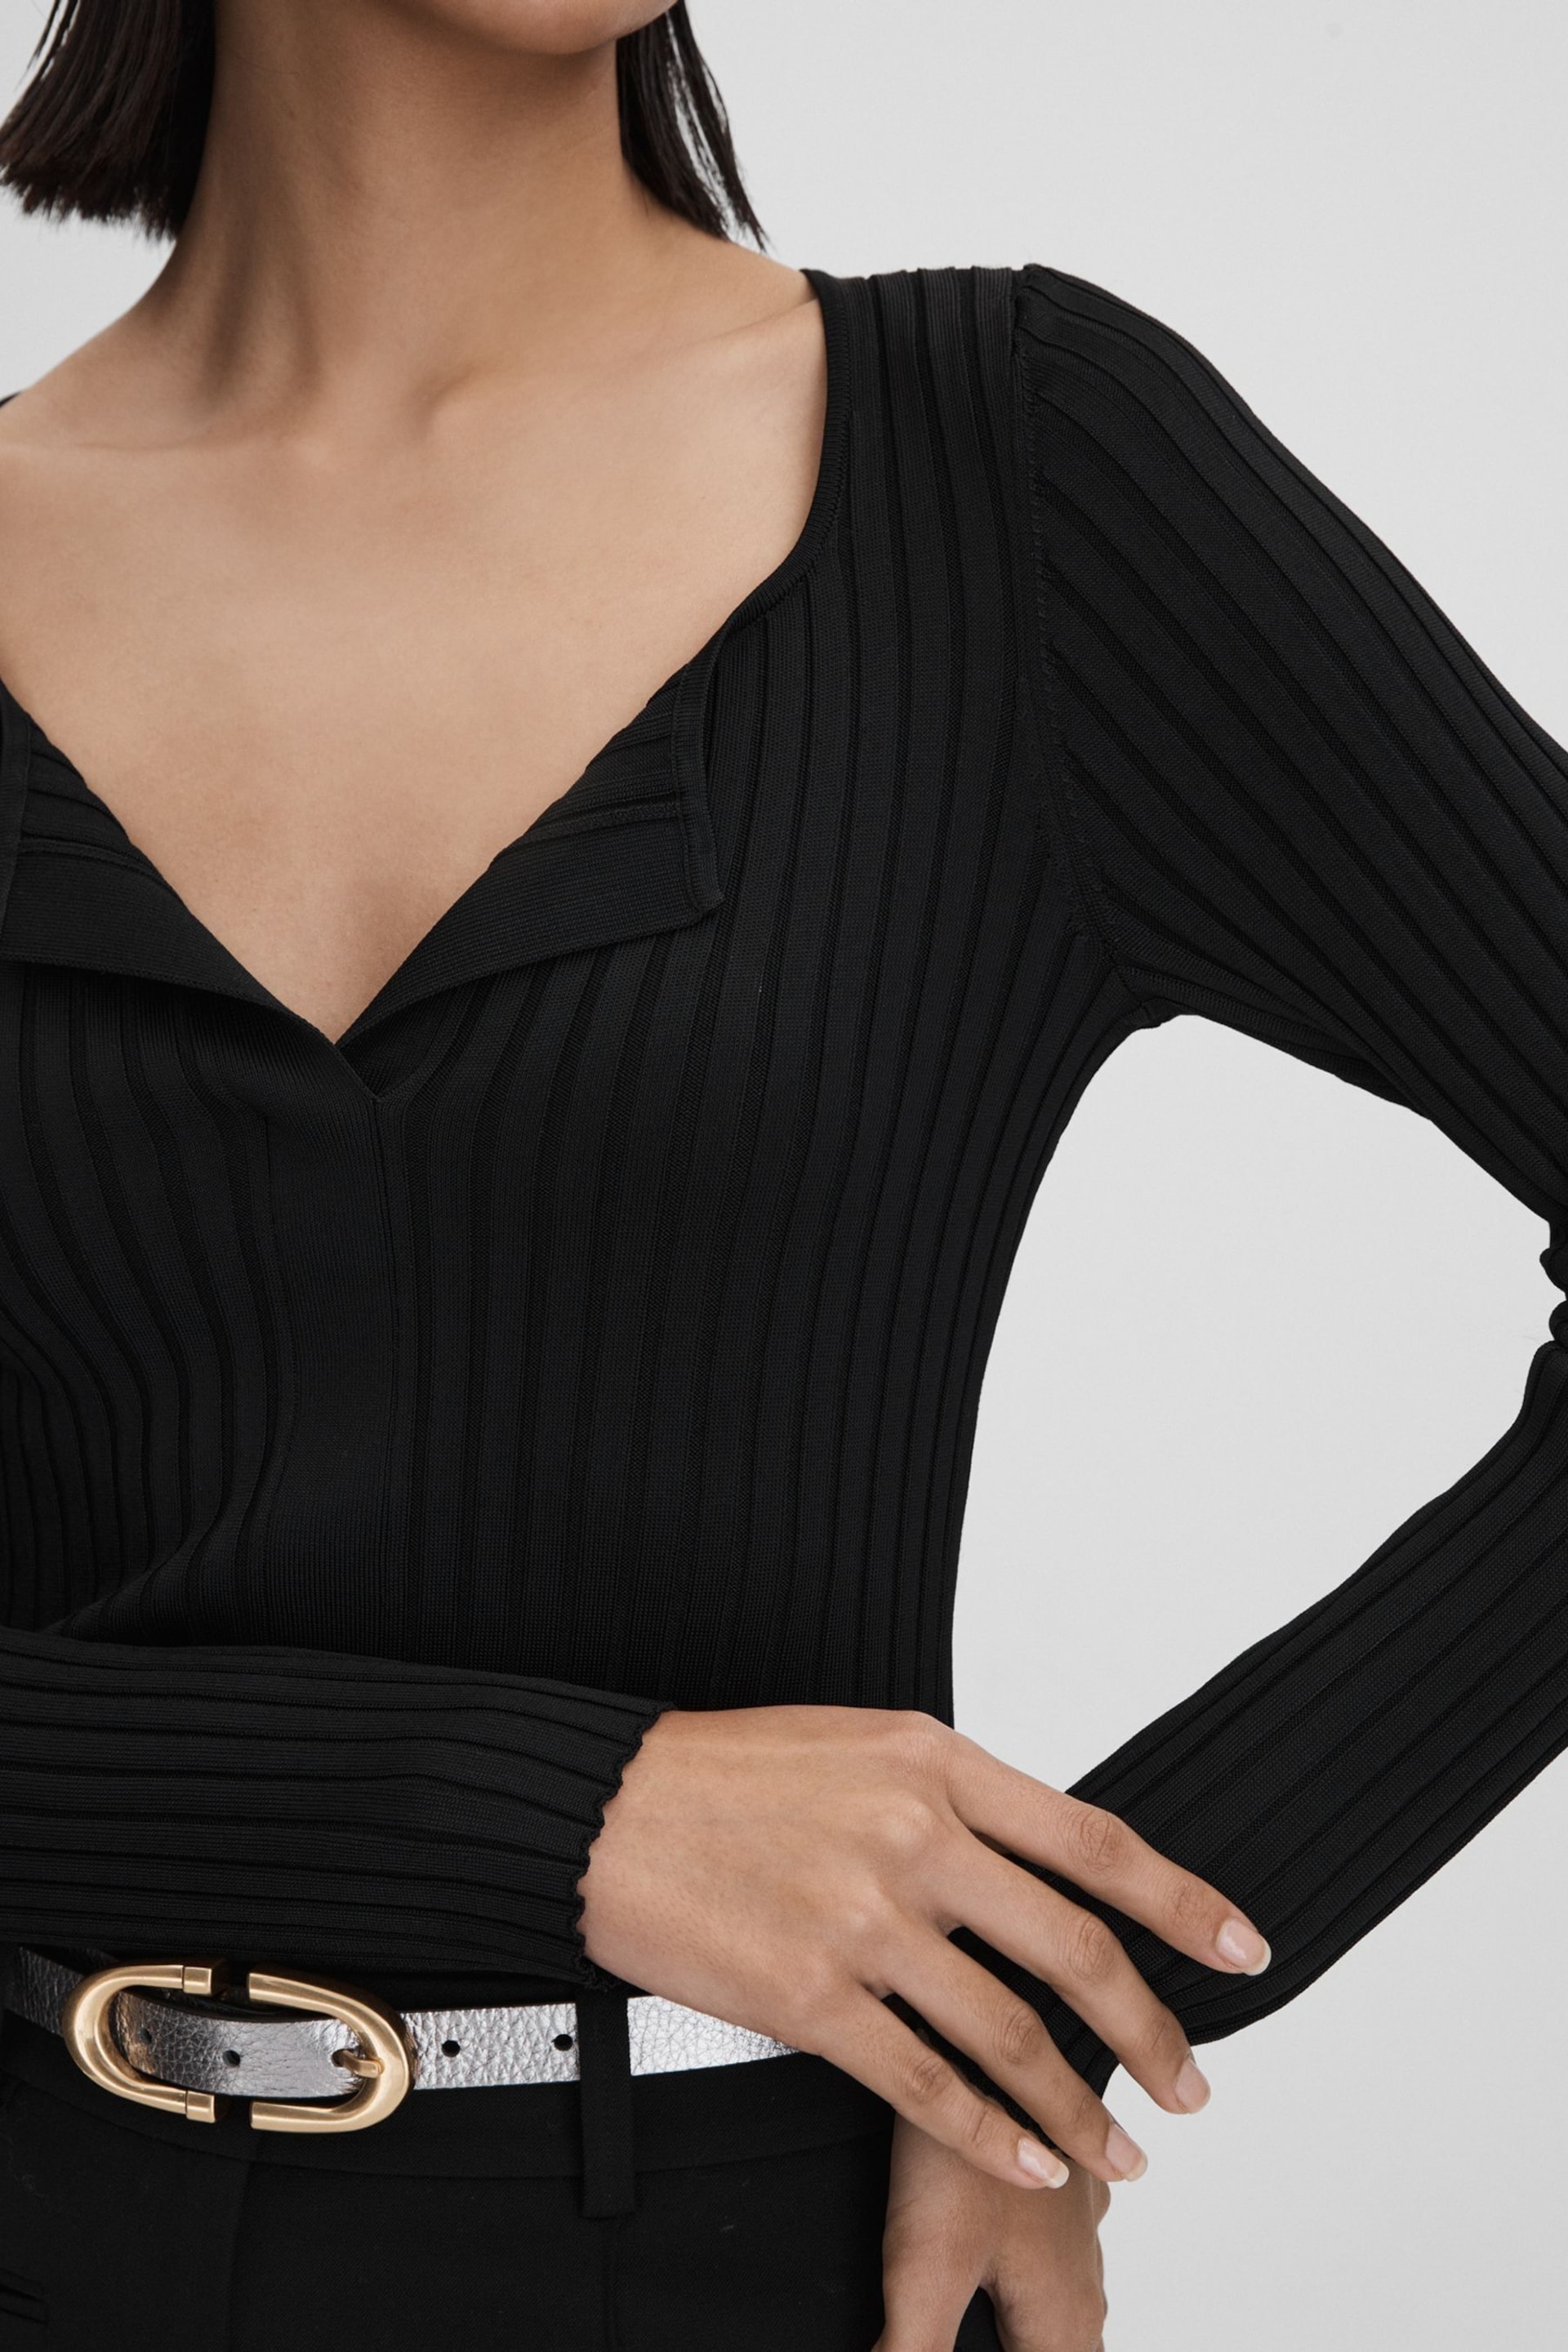 Reiss Black Monica Ribbed Open Collar Top - Image 4 of 7